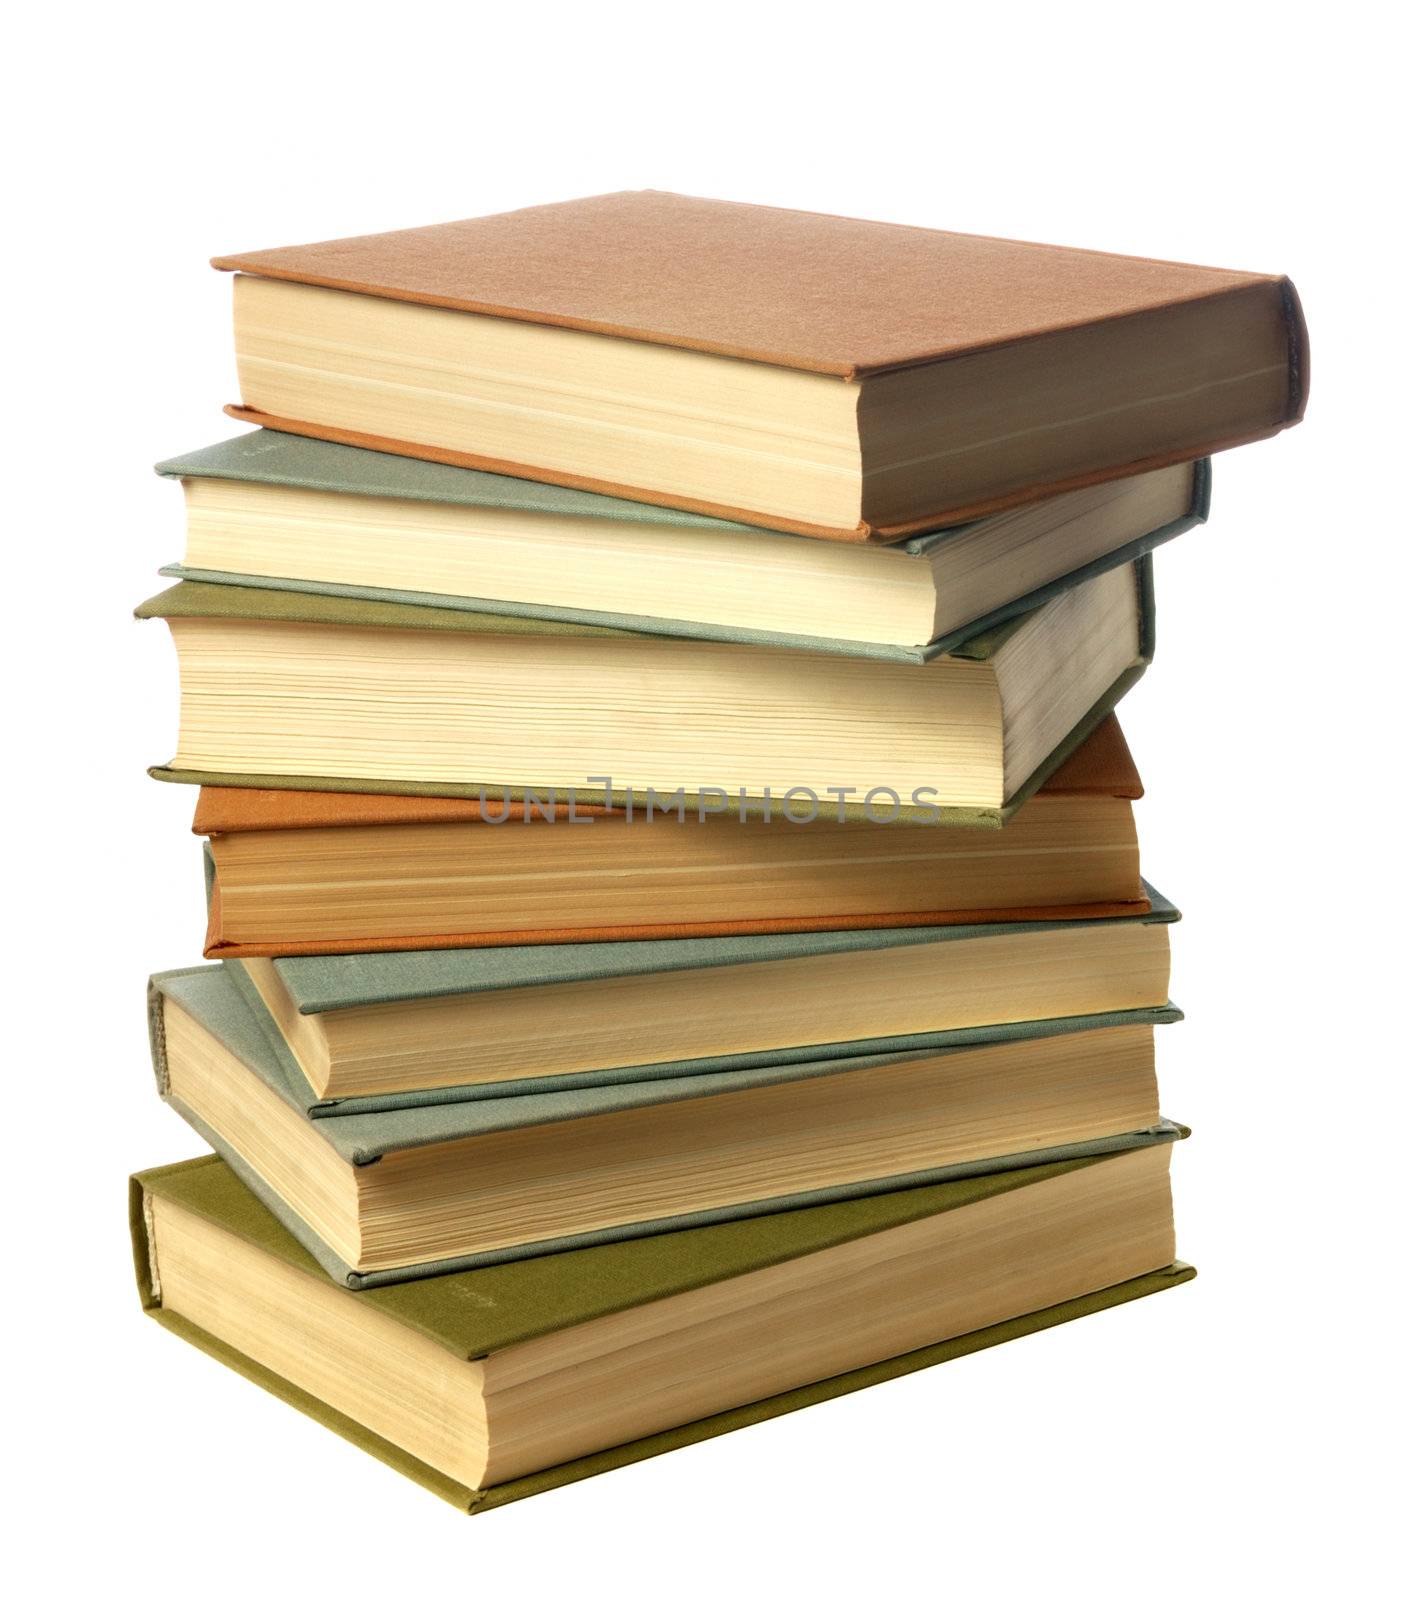 Books. A pile of textbooks isolated on a white background